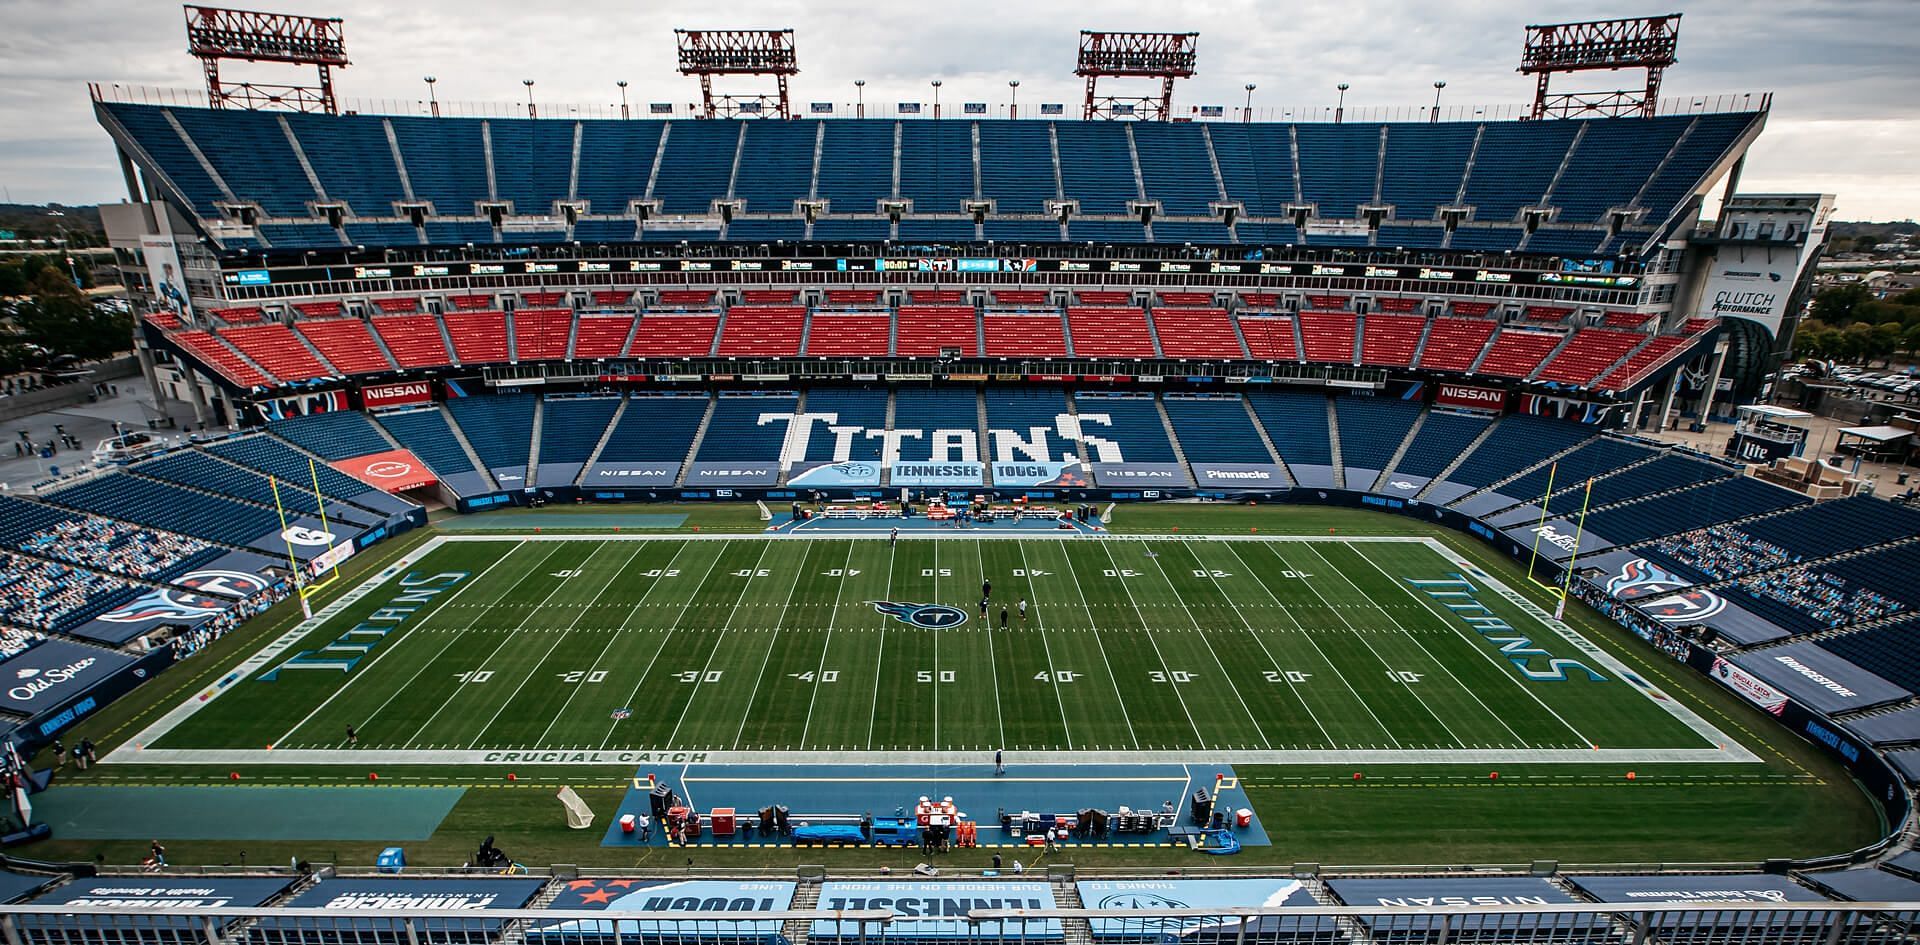 Mayor Officially Proposes New Stadium for Titans, Pith in the Wind